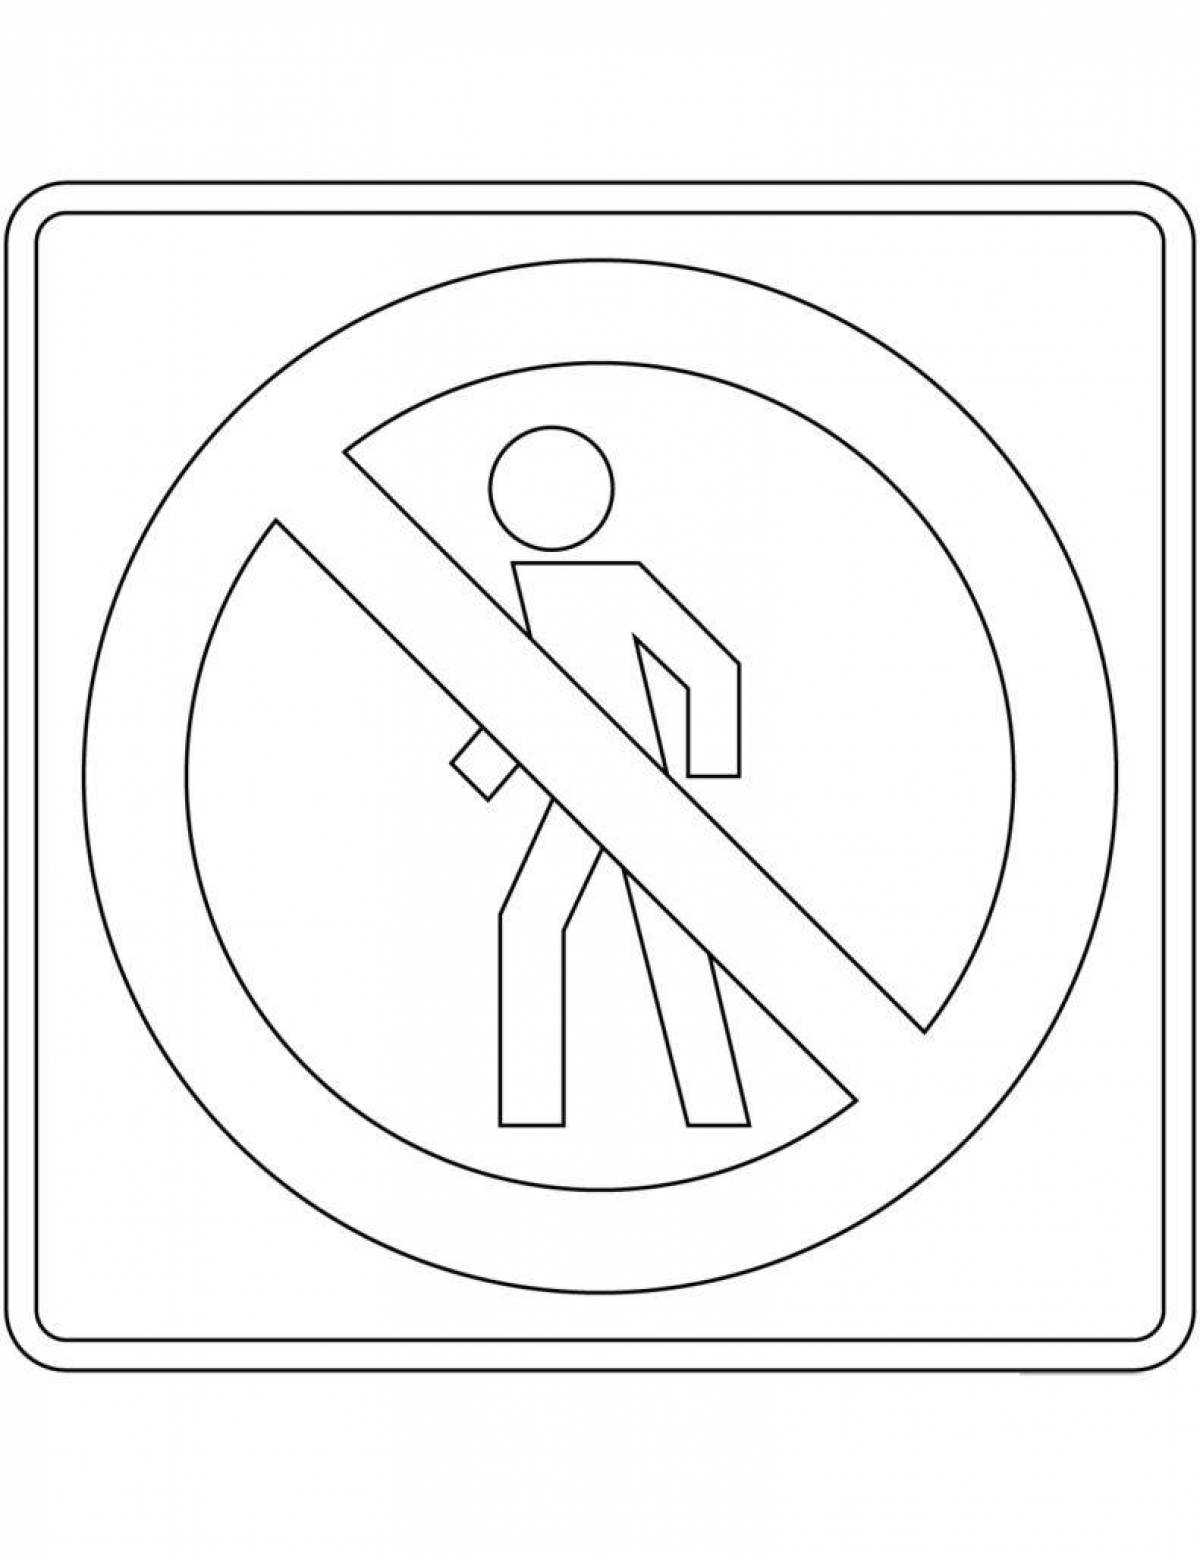 Brightly colored no entry coloring page